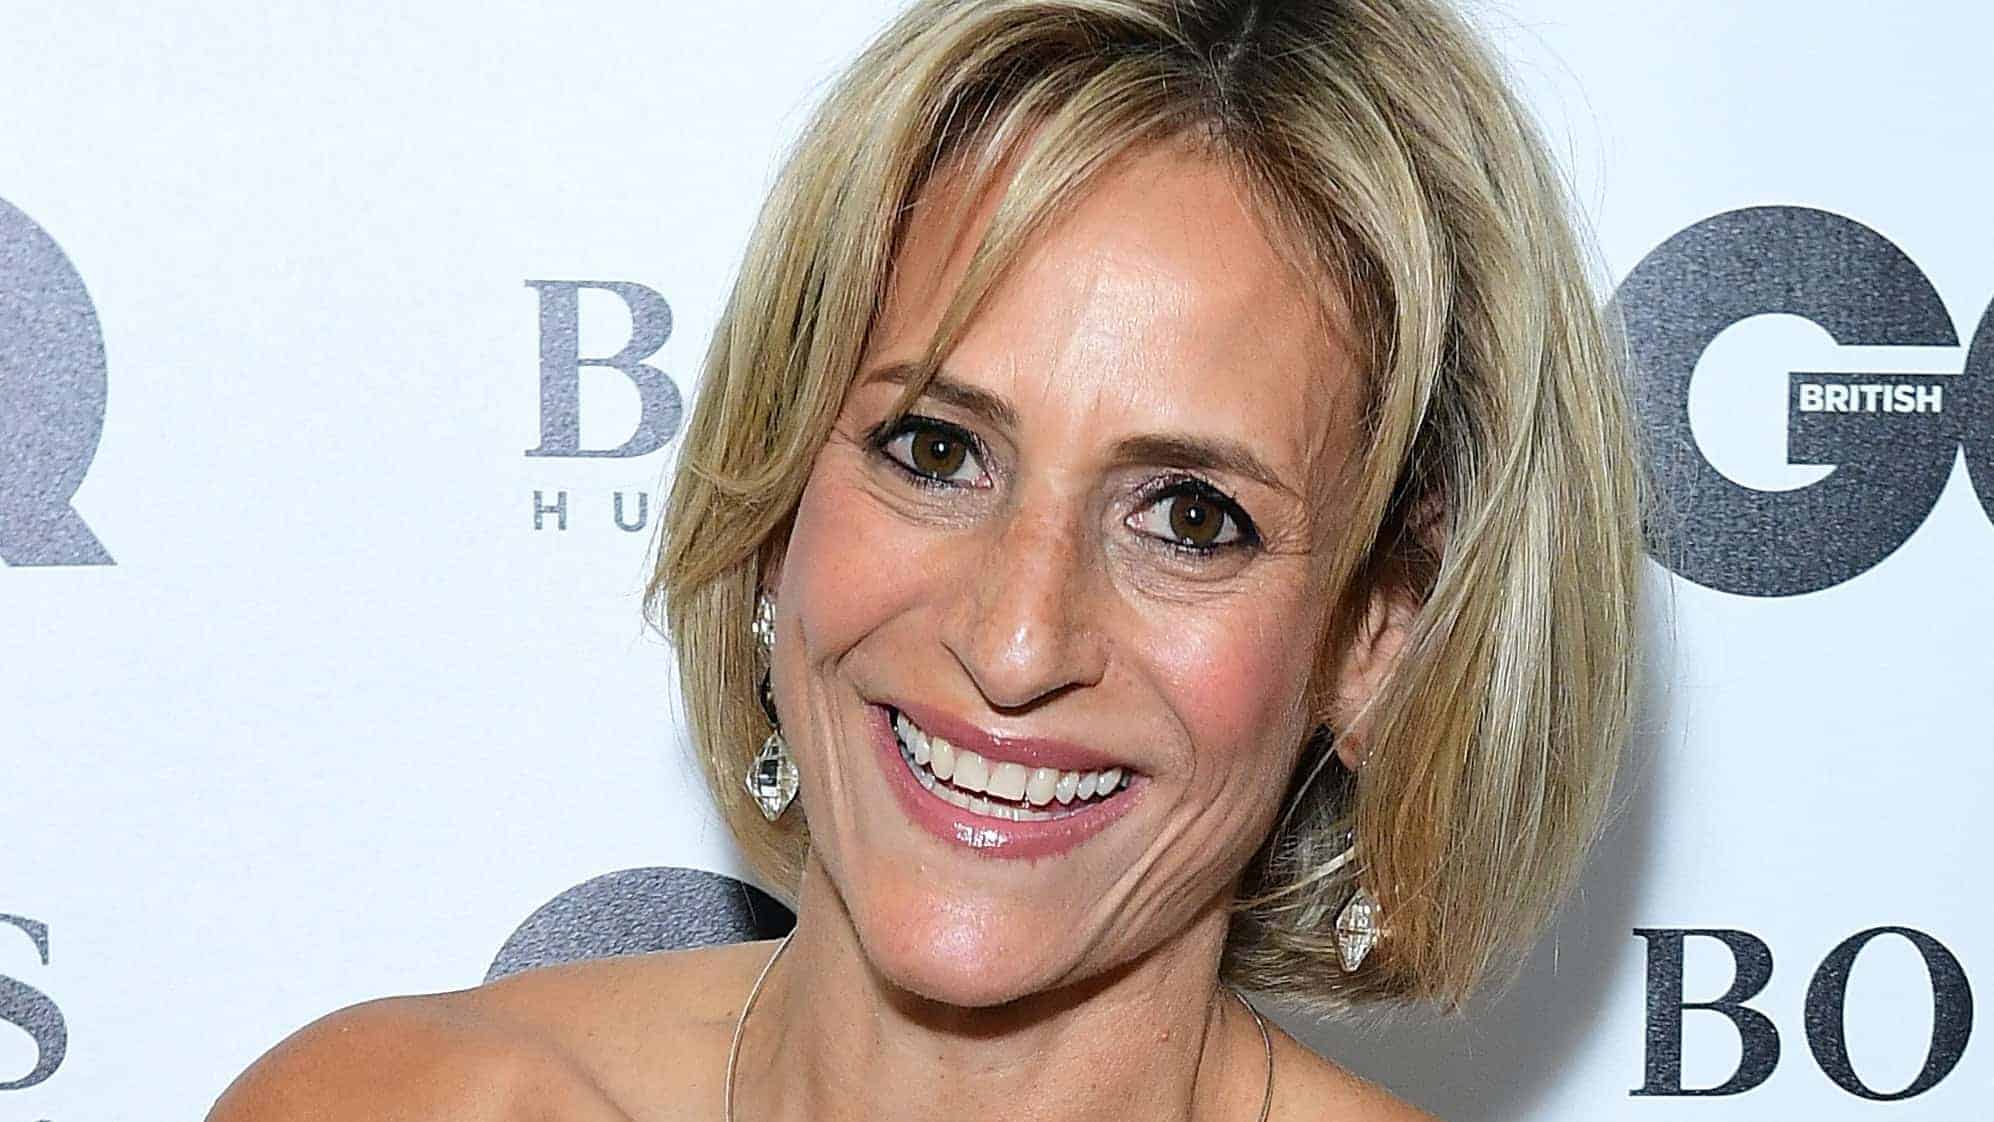 Emily Maitlis and Jon Sopel are latest big names to quit BBC